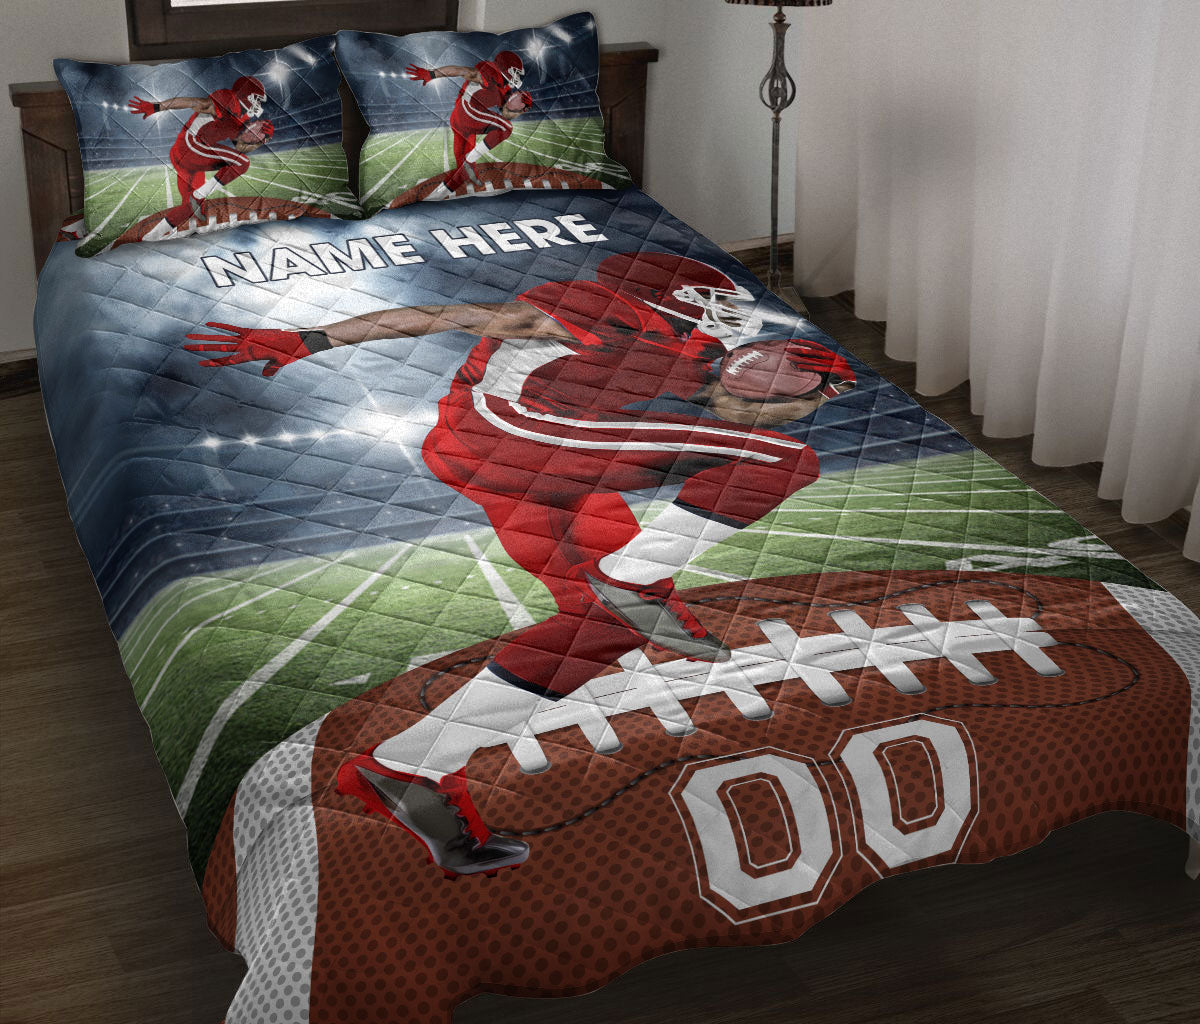 Ohaprints-Quilt-Bed-Set-Pillowcase-Football-Player-Field-Night-Sports-Lover-Gift-Custom-Personalized-Name-Number-Blanket-Bedspread-Bedding-1099-Throw (55'' x 60'')